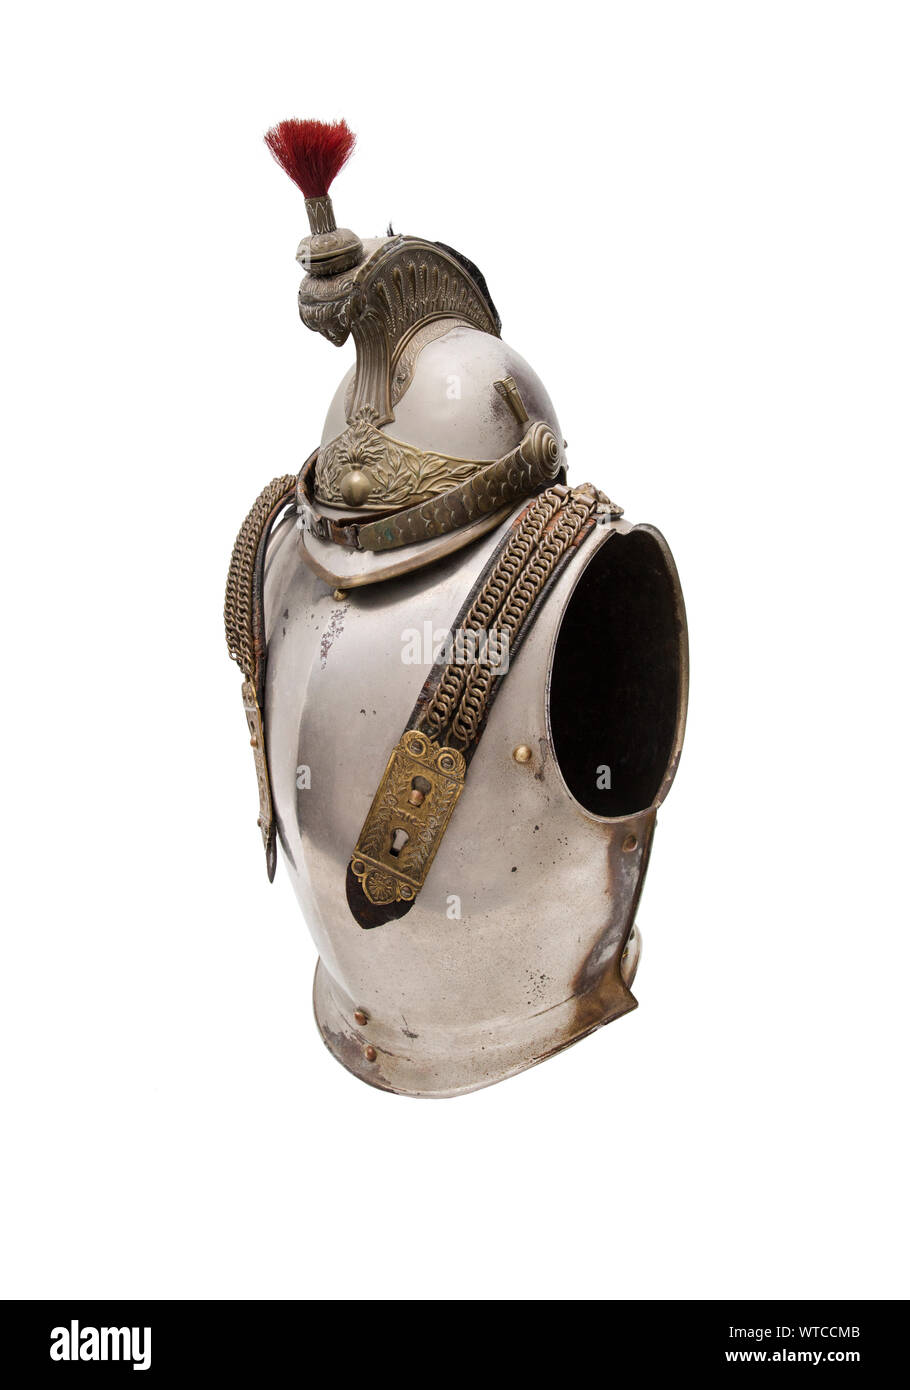 1874 French line officer's cuirassier breastplate and helmet. Cuirass steel body with brass pair of lions, straps and rivets. Steel helmet ca 1900, wi Stock Photo